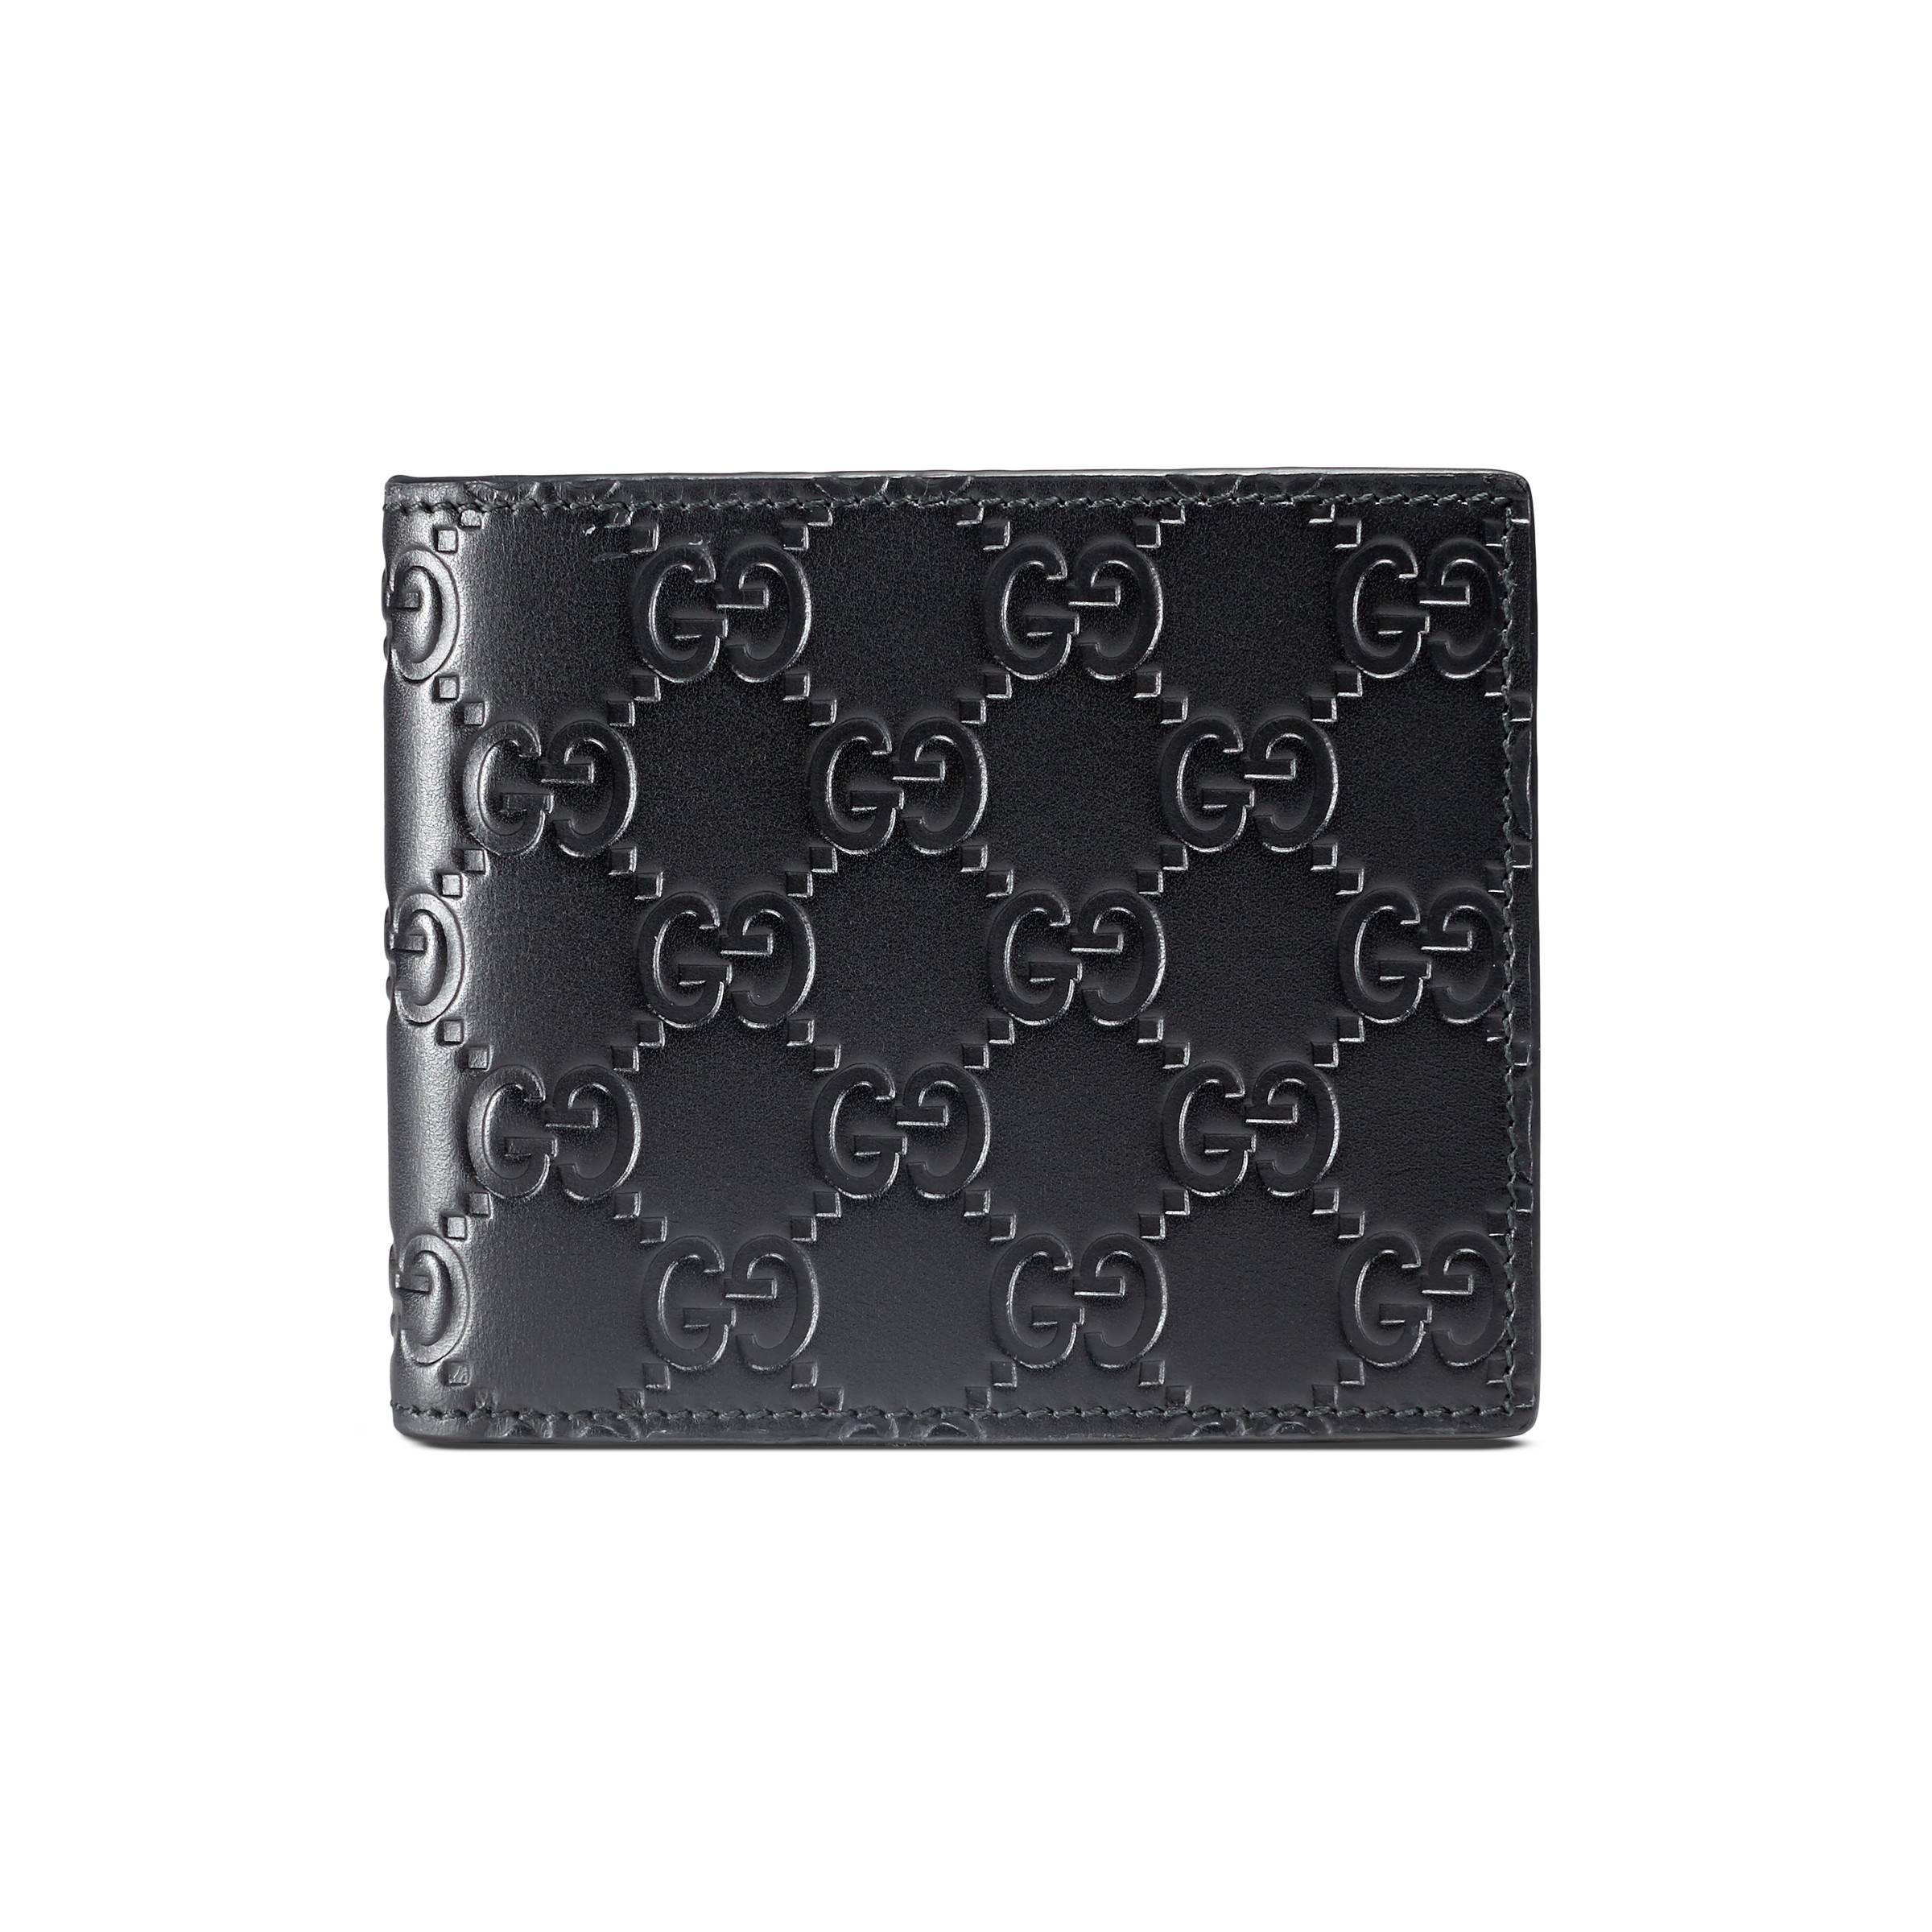 Gucci Leather Signature Wallet in Black for Men - Save 36% - Lyst